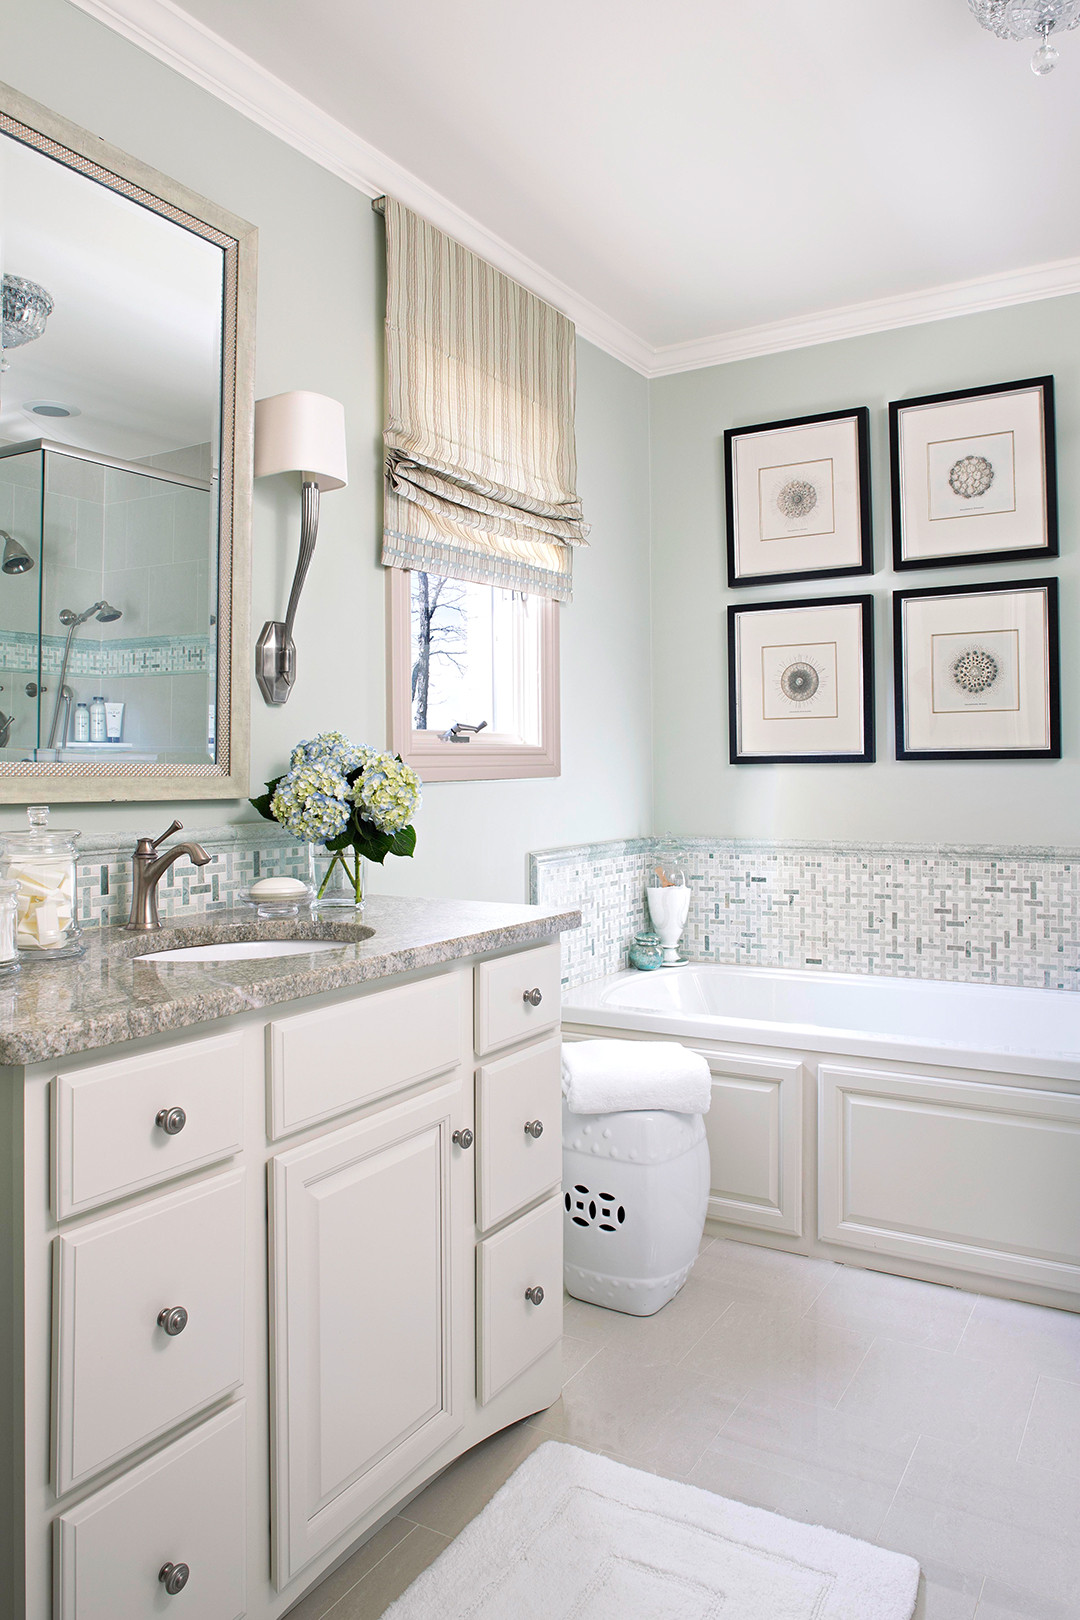 Paint Colors For A Bathroom
 12 Popular Bathroom Paint Colors Our Editors Swear By